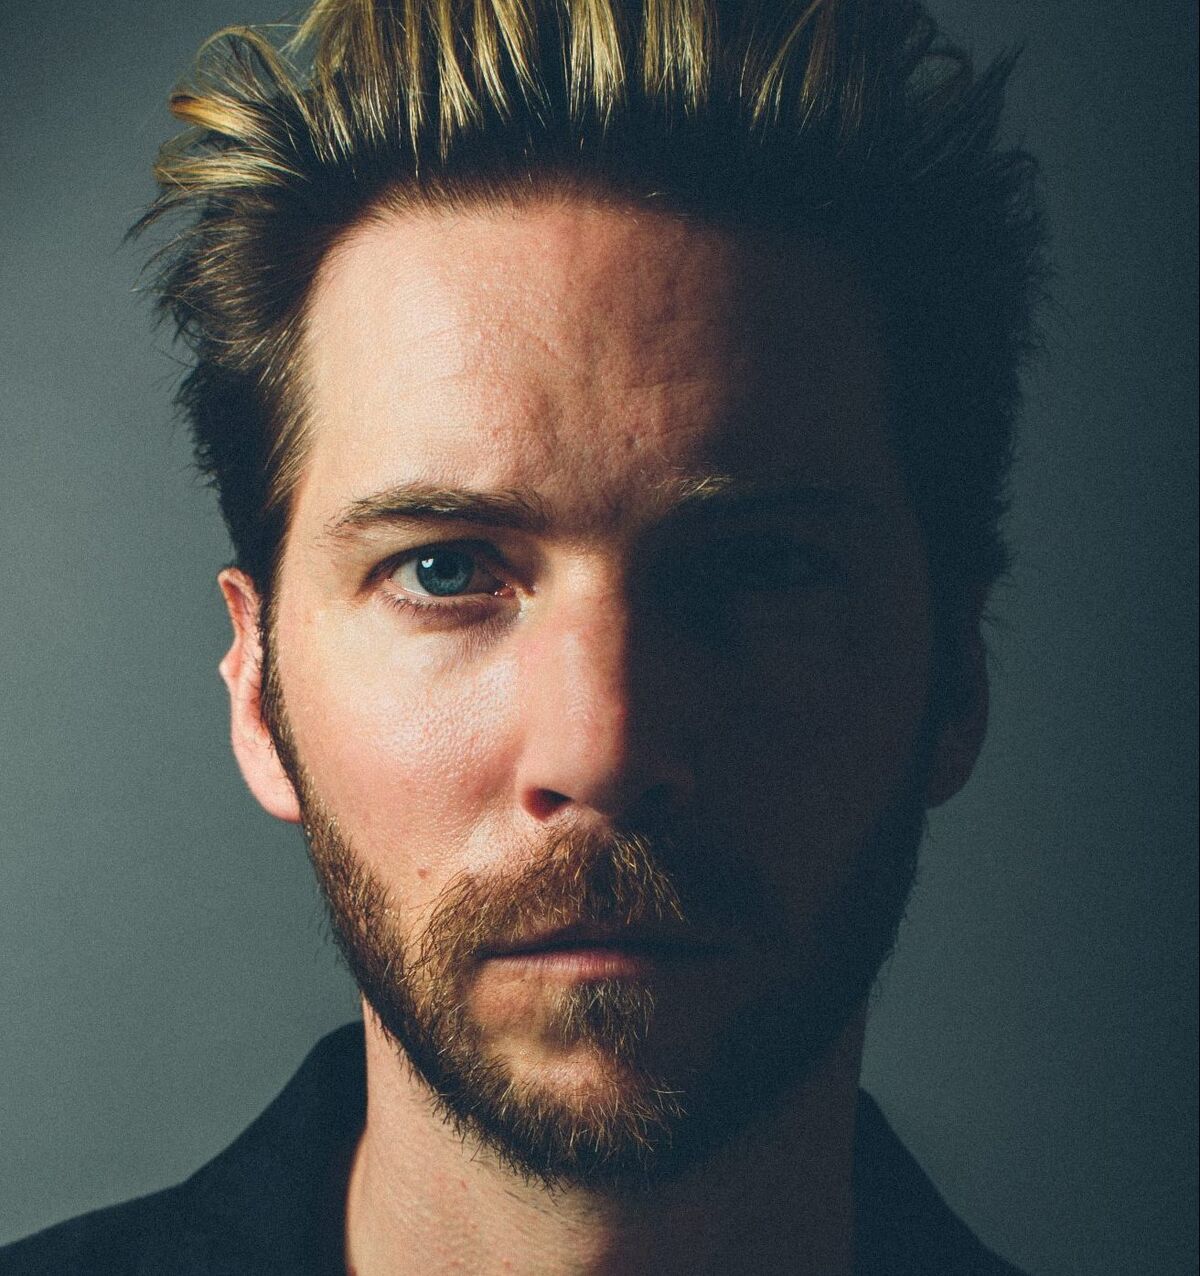 Watch Troy Baker show off his voice acting skills – Destructoid